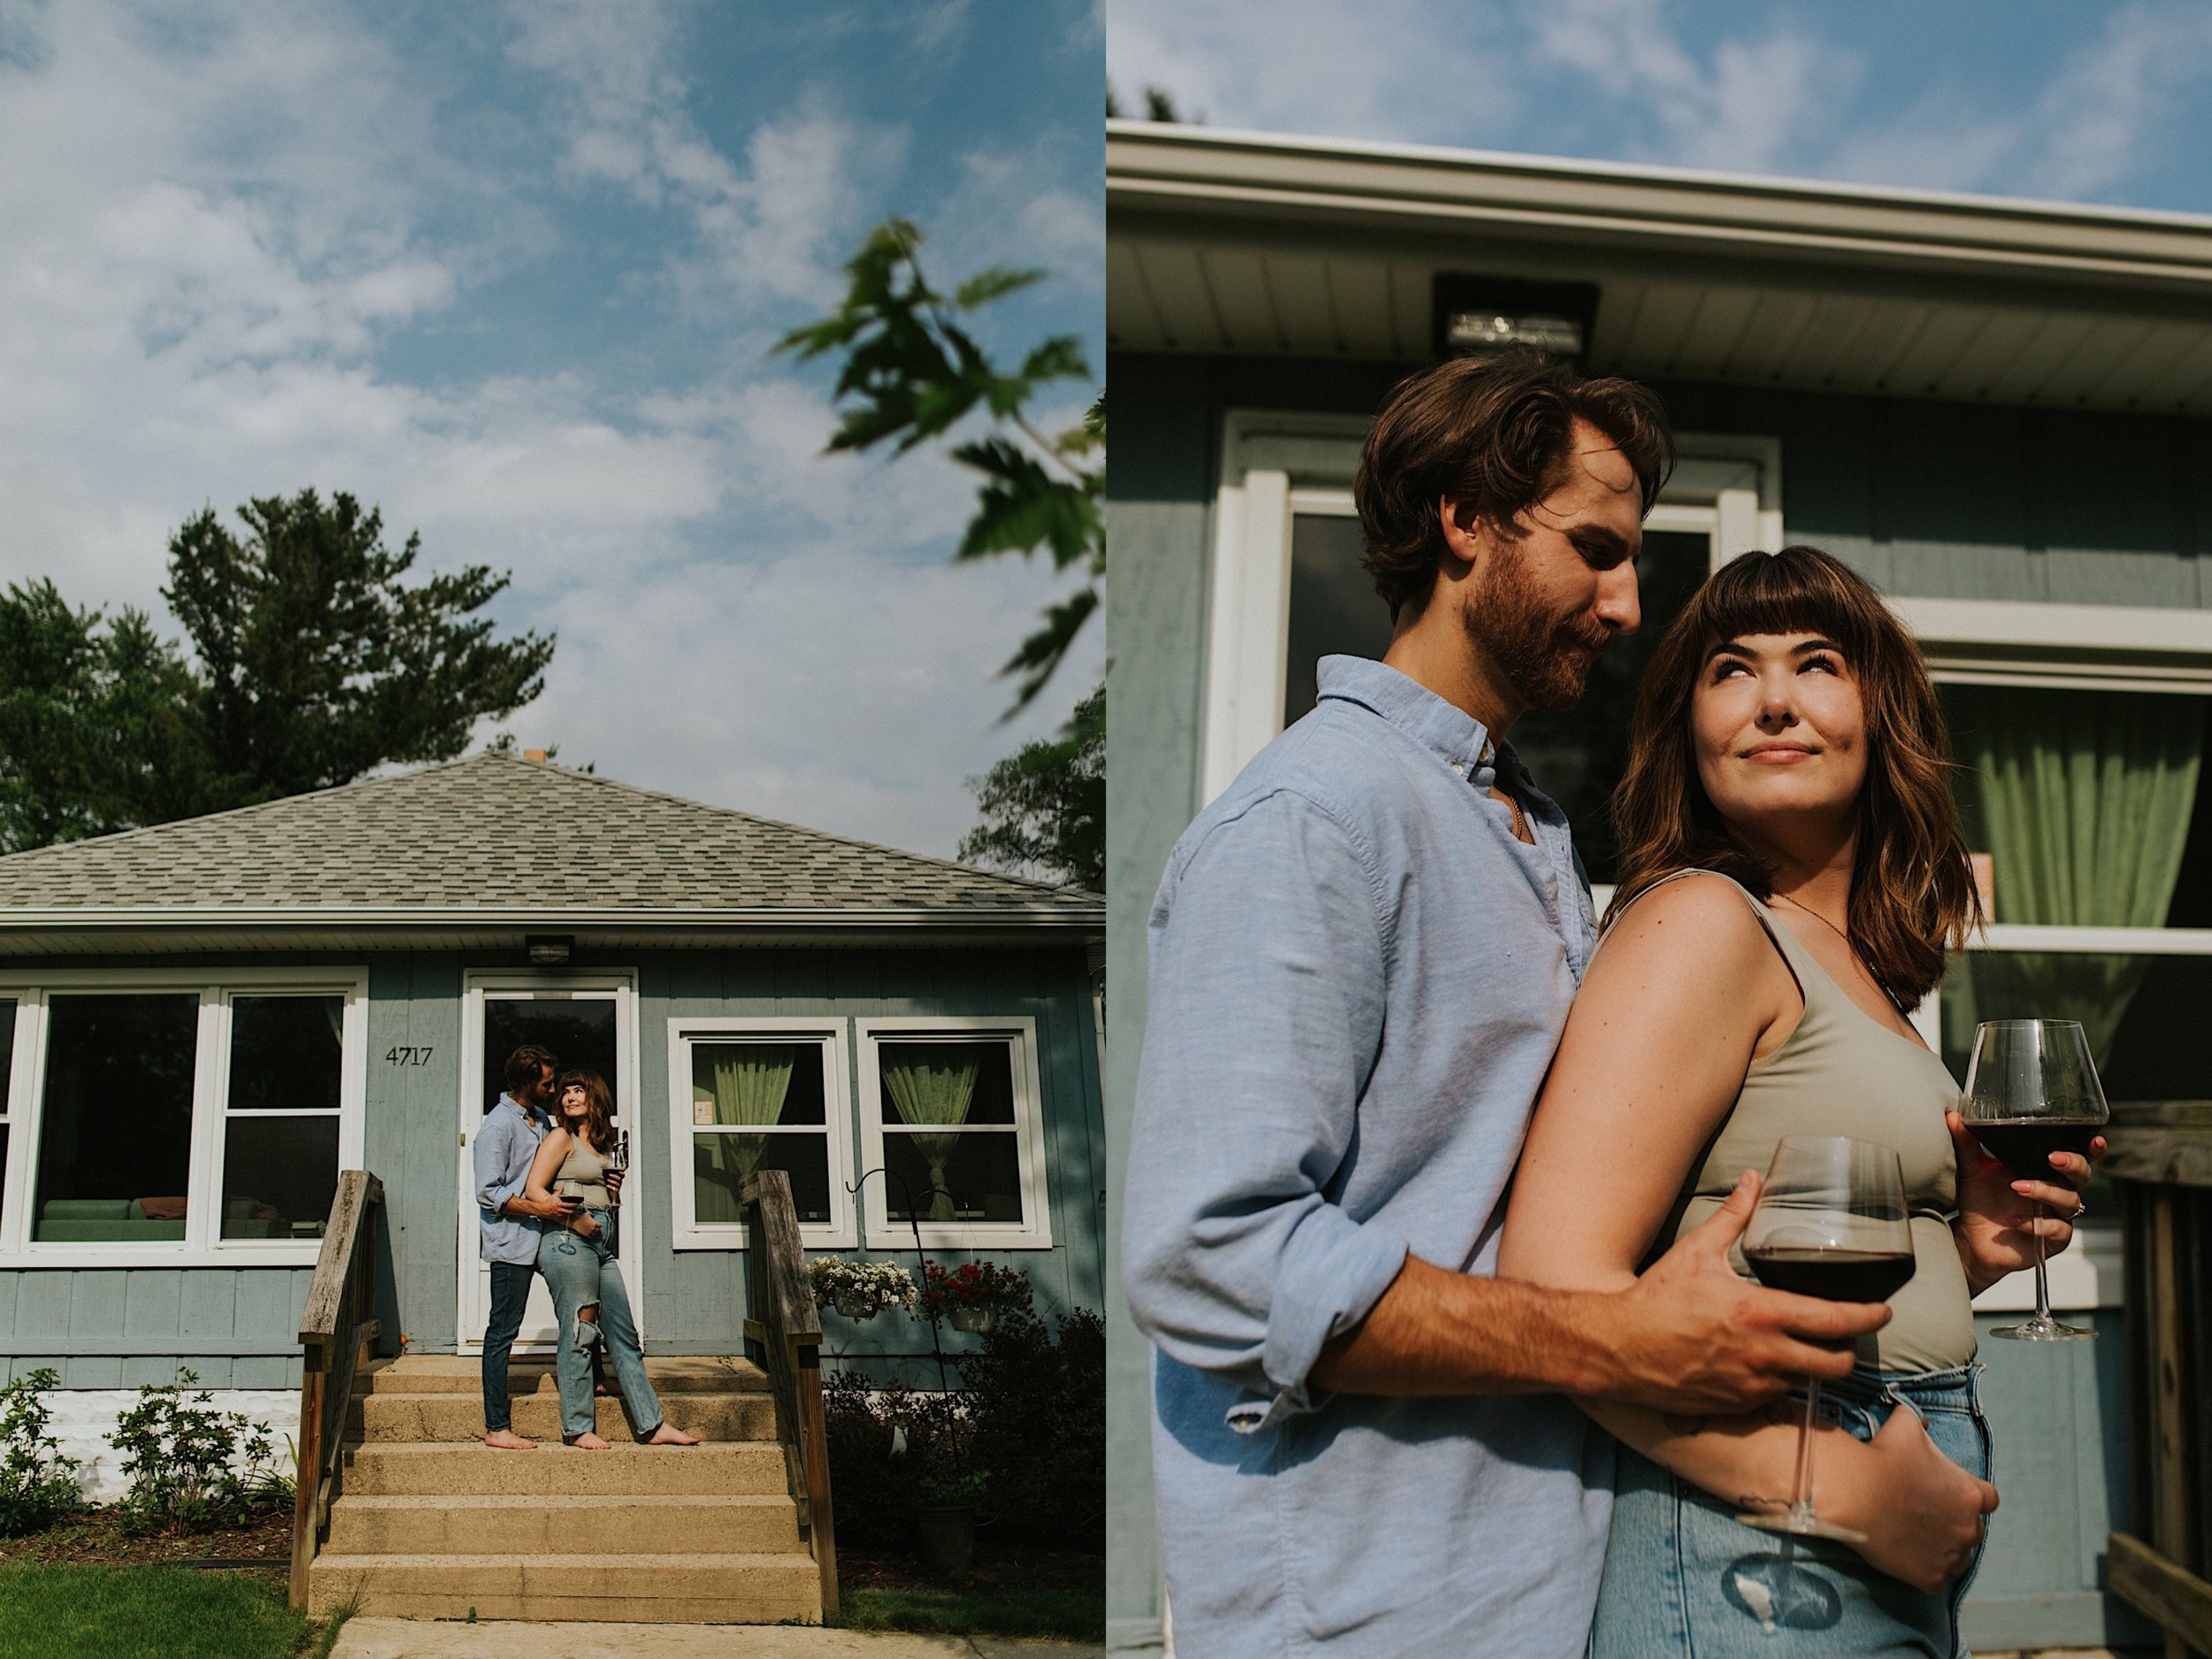 Left image, a married couple stands on their front porch while holding glasses of wine.  The husband stands behind his wife while they look at each other.  Right image, a close up image of a husband and wife standing on their front porch with wine.